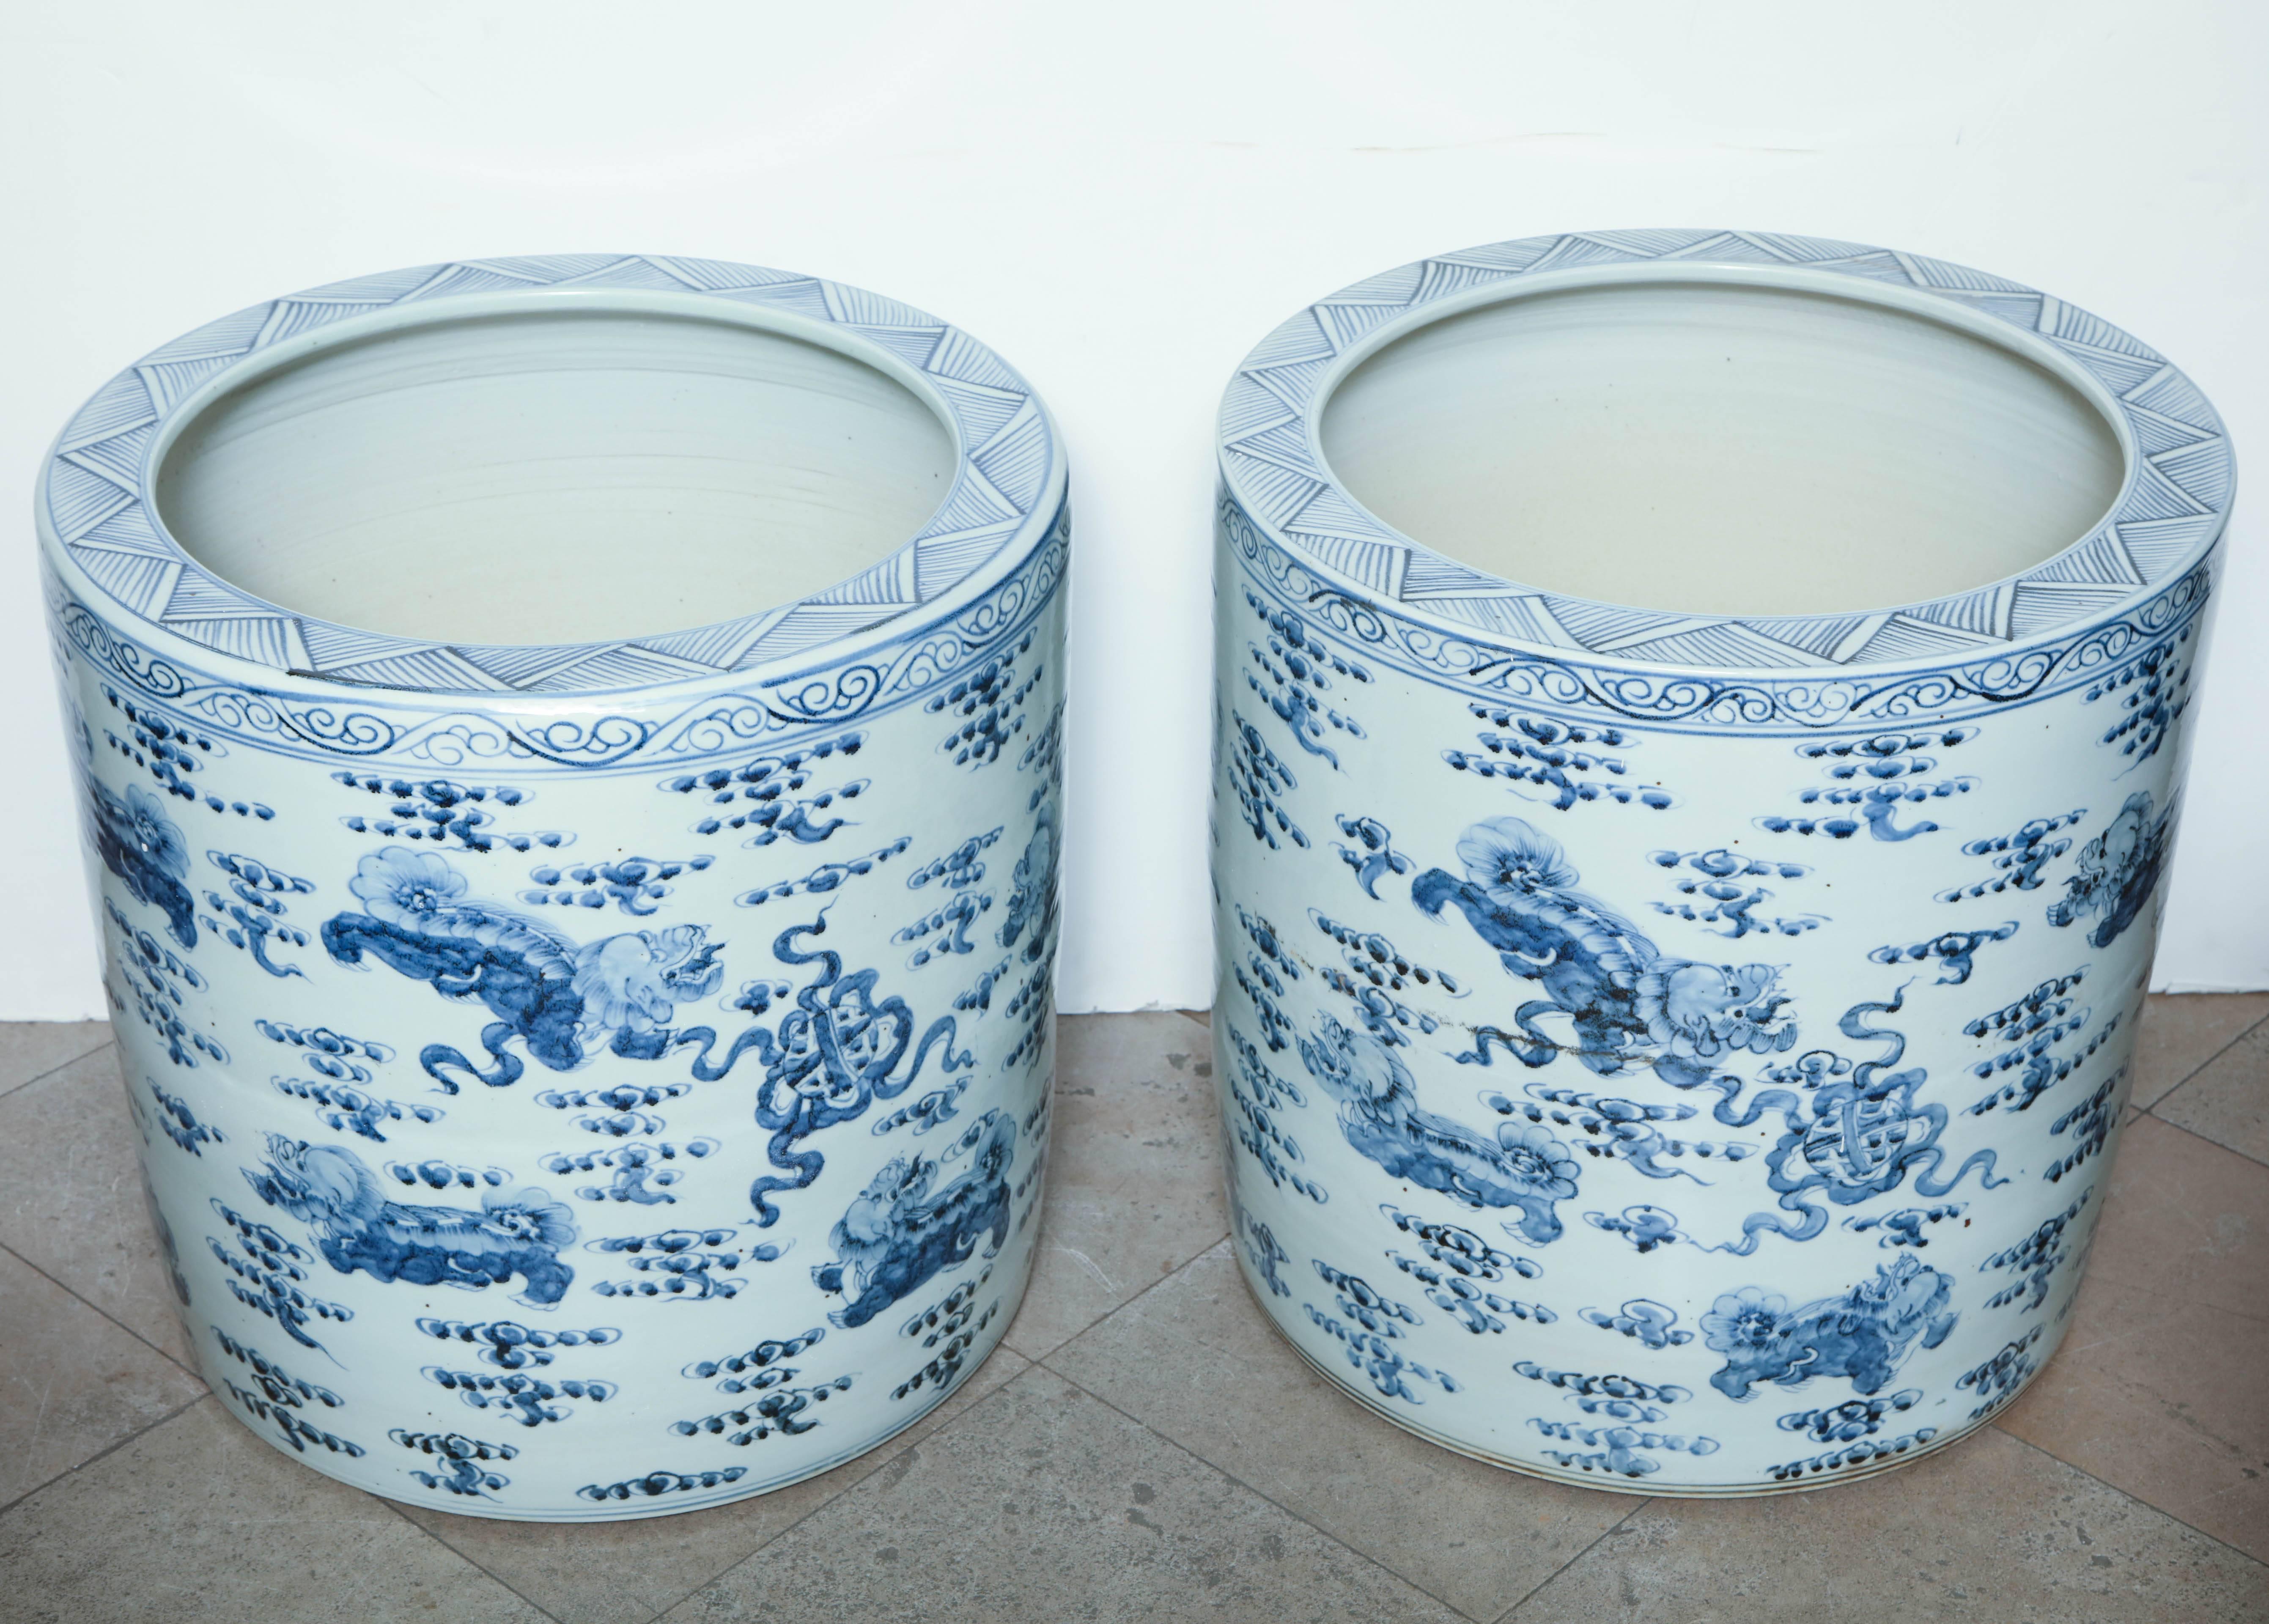 20th Century Pair of Chinese Export Porcelain Fish Bowls